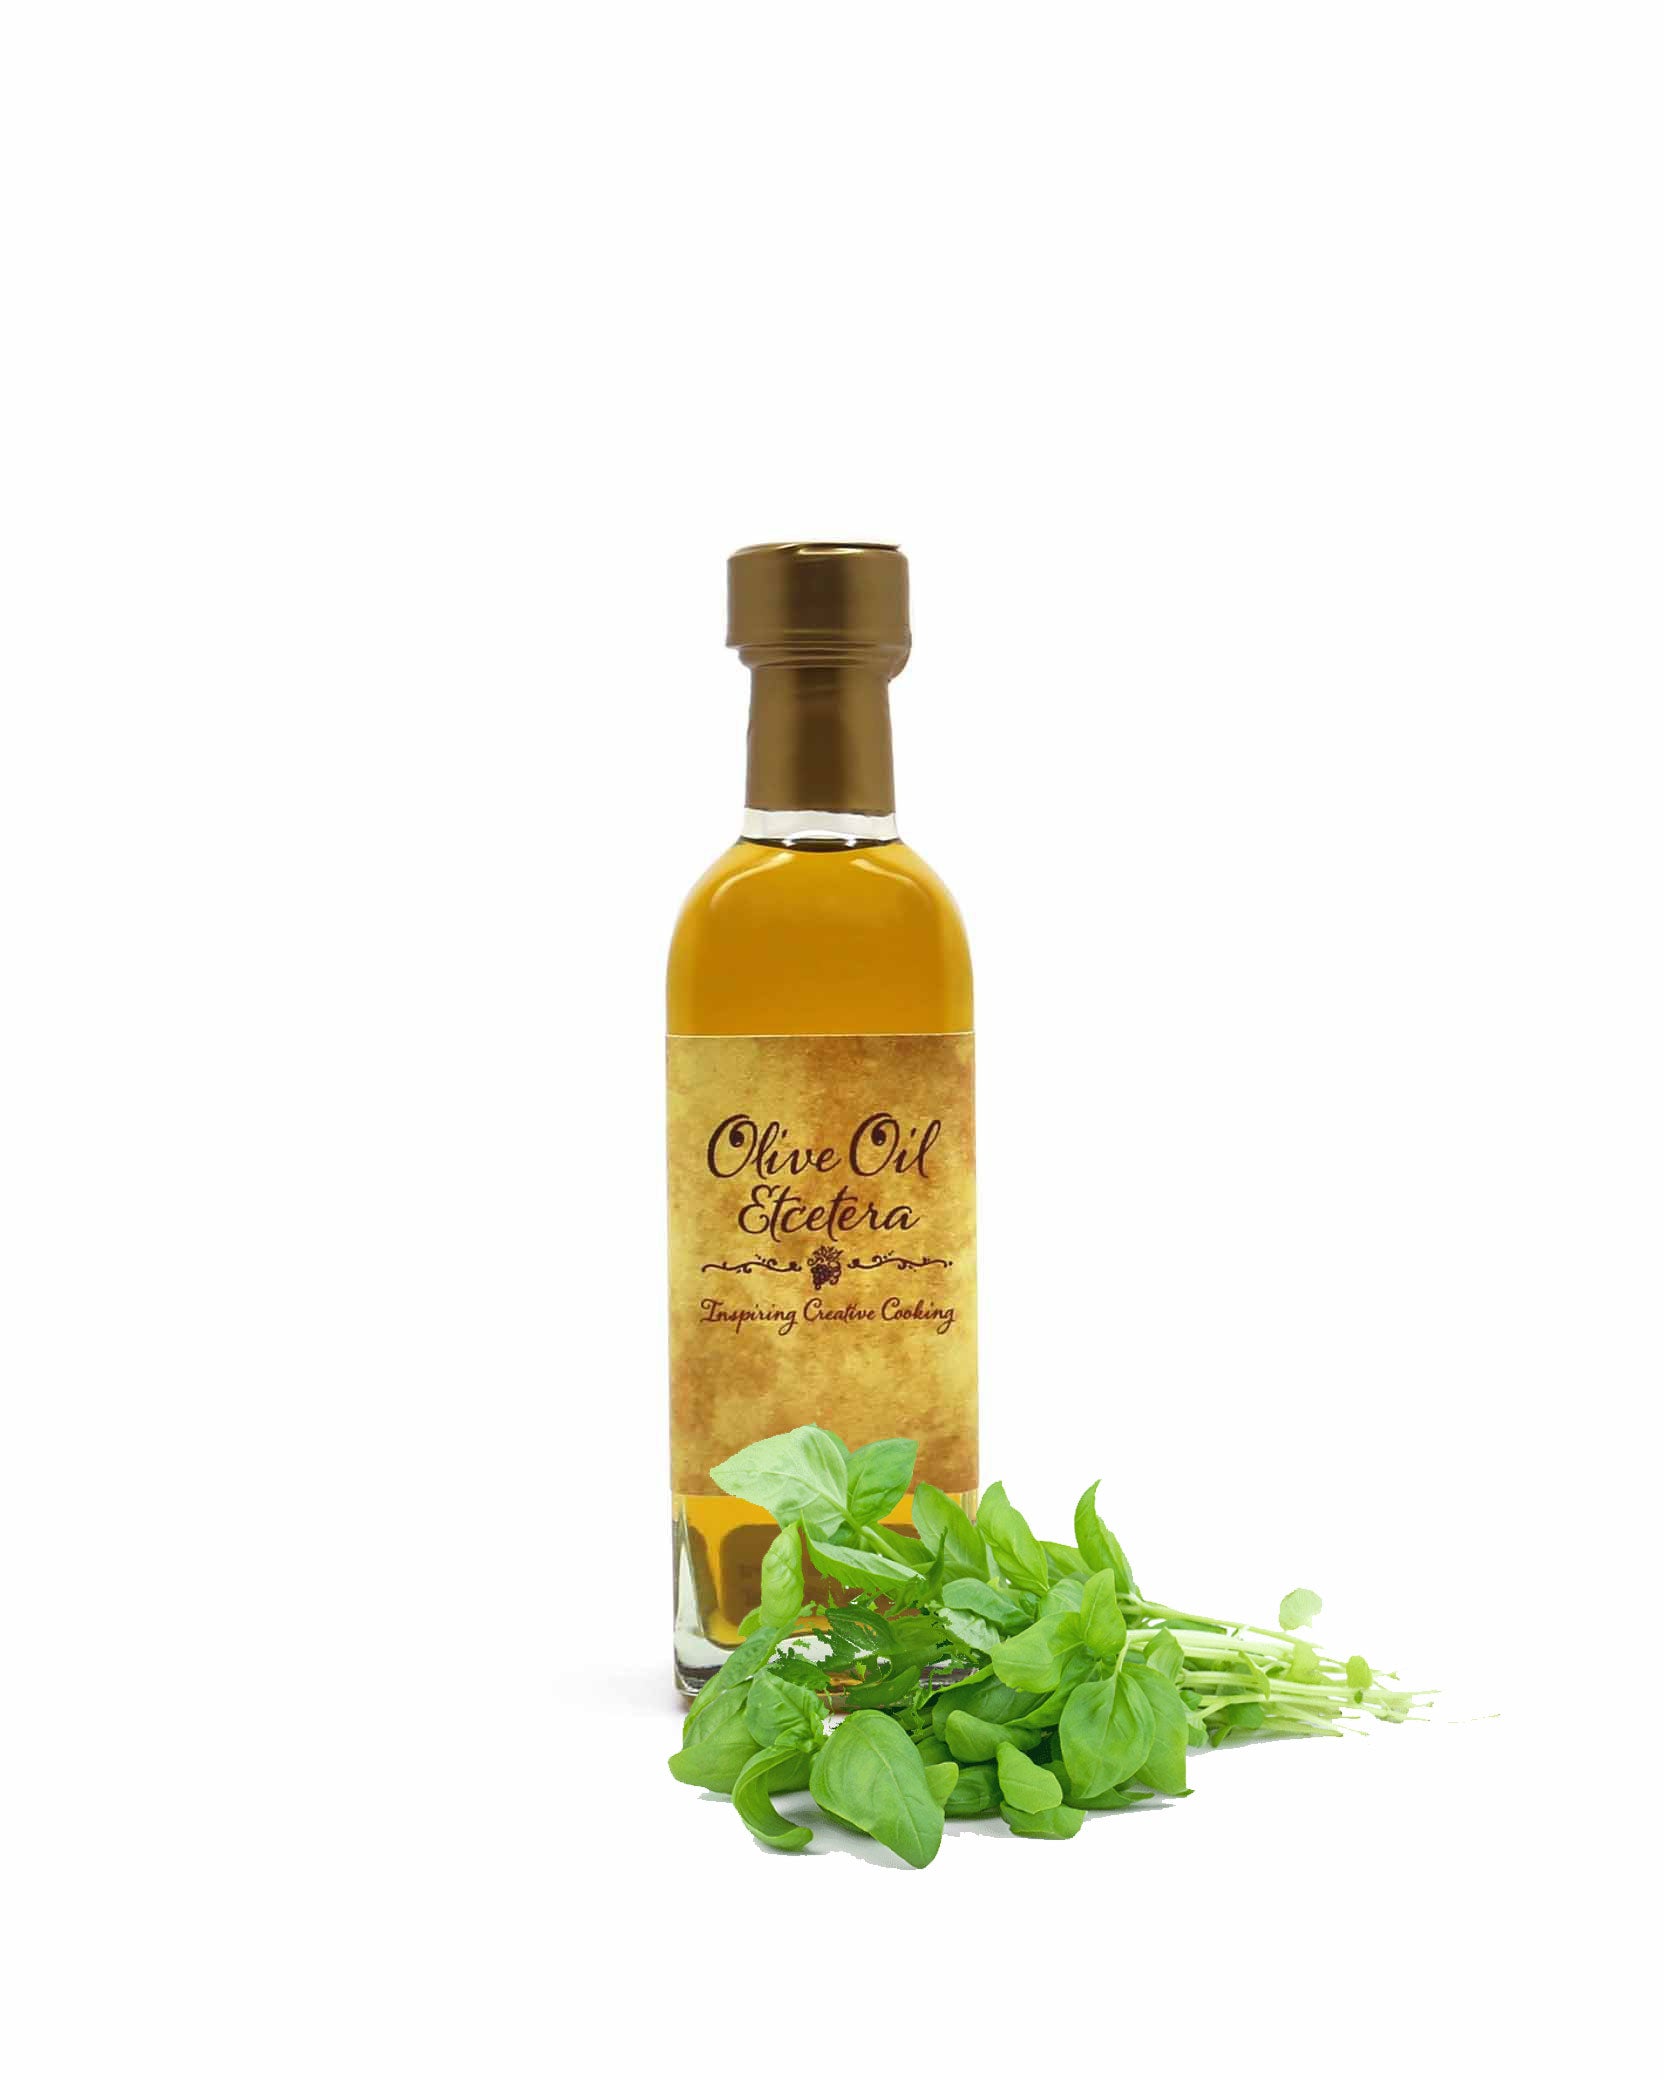 Tuscan Herb Olive Oil - Olive Oil Etcetera - Bucks County'sGourmet Olive Oil and Vinegar Store